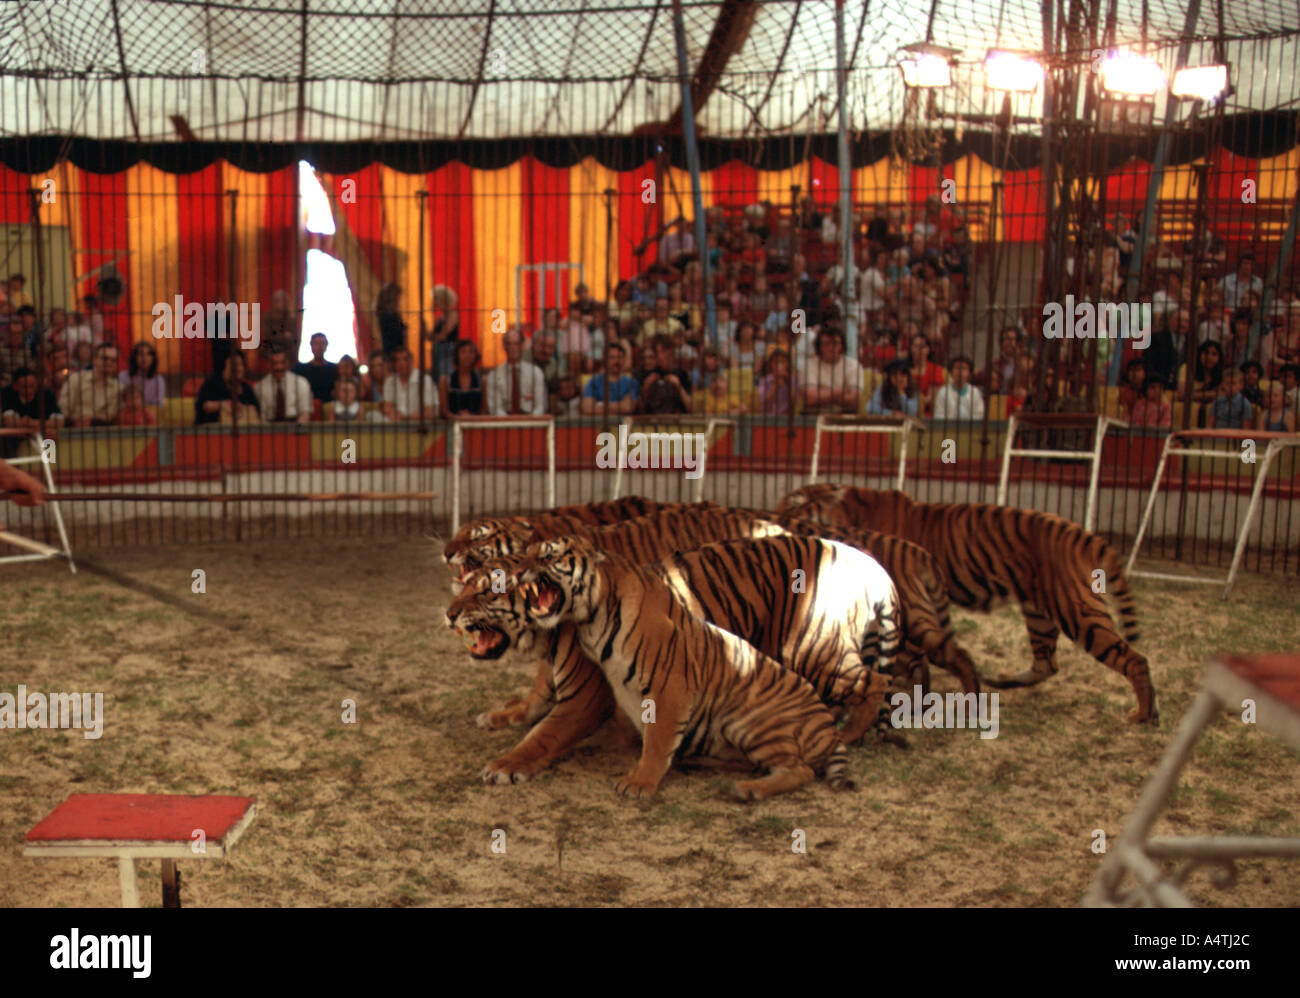 Tigers in circus ring Stock Photo